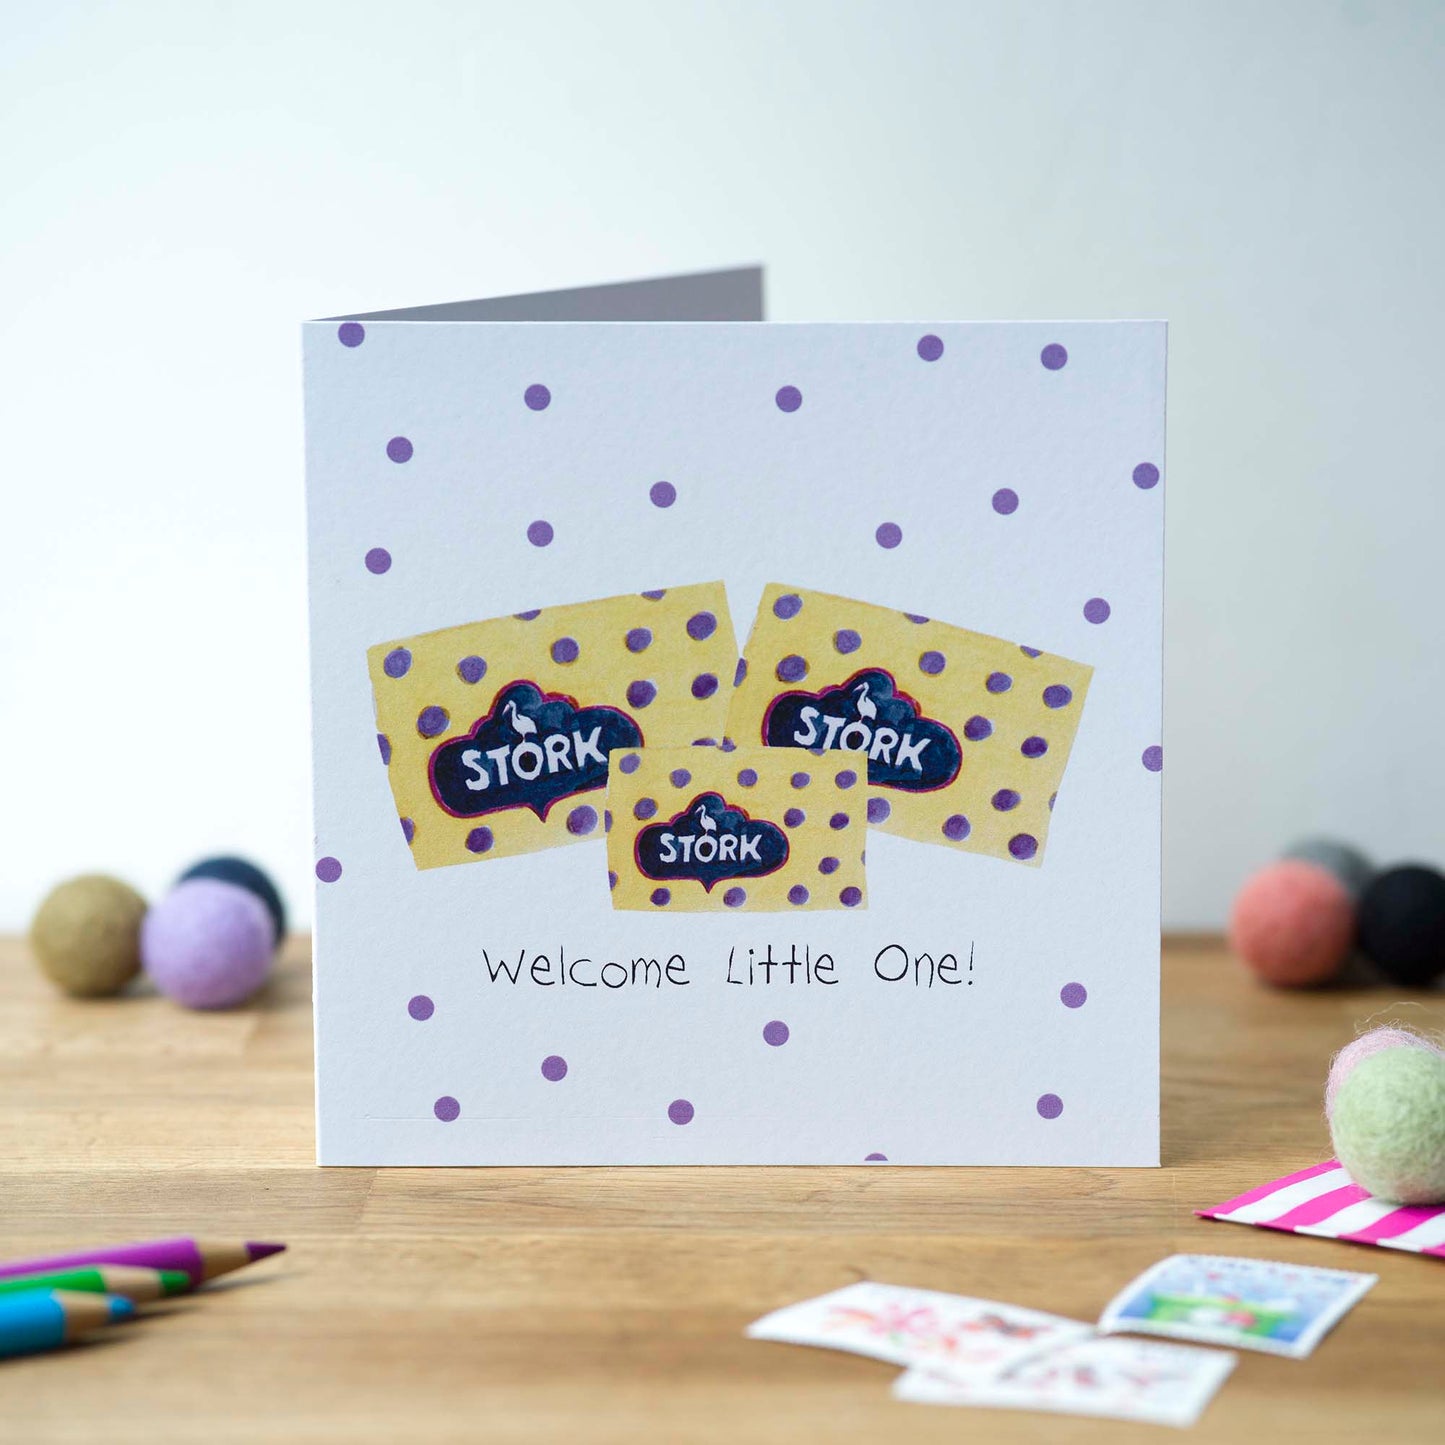 Welcome Little One! Greeting Card